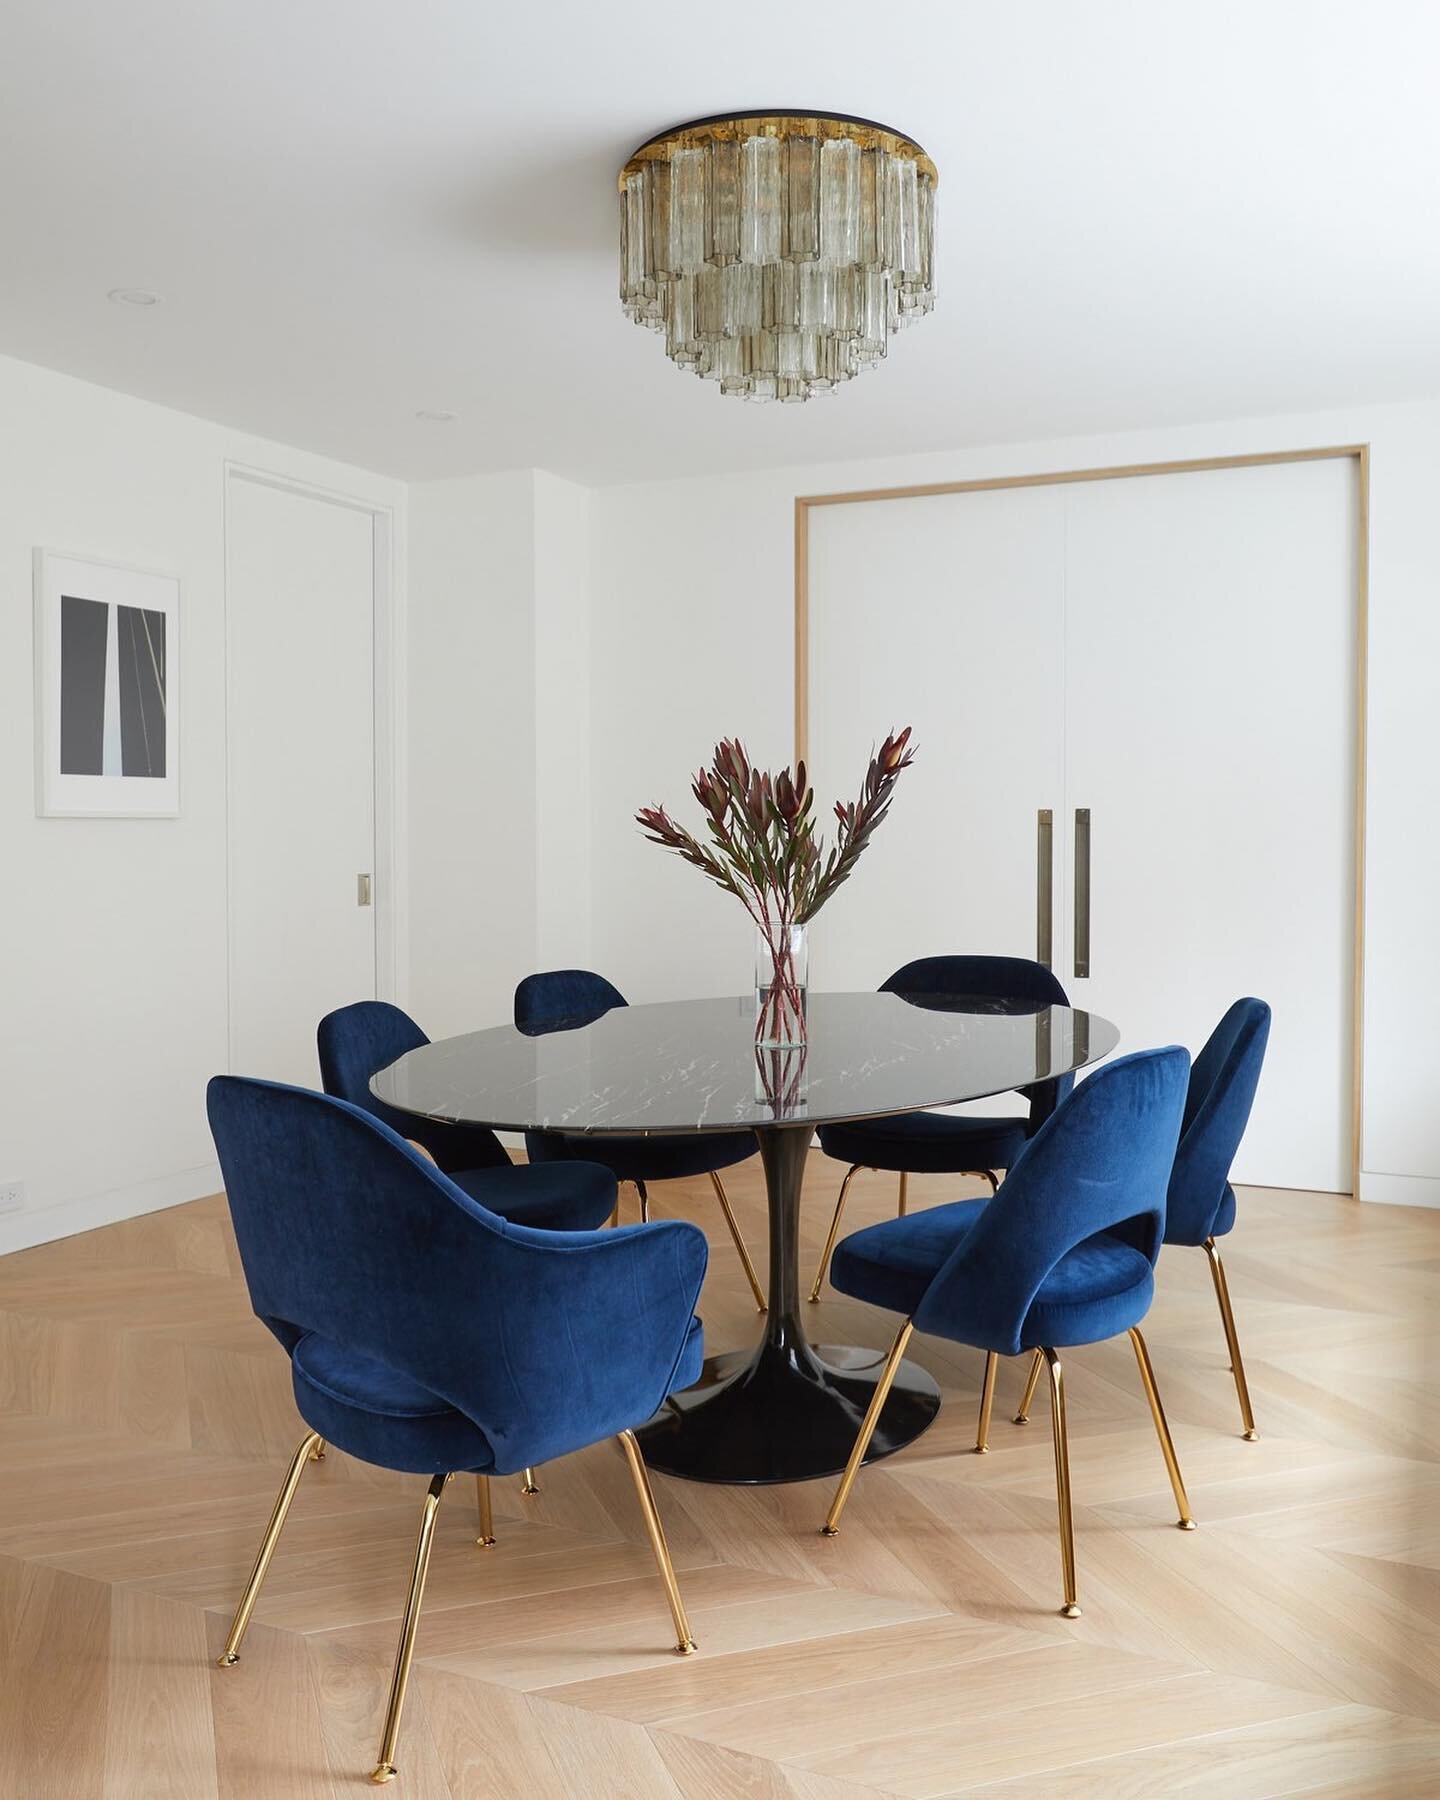 We were thrilled to work with the talented team at @fredericktangarchitecture on their Upper East Side Combination project. They sourced a gorgeous set of Saarinen Executive Chairs, 24k Gold Edition in Navy Velvet from us. The result could not be mor